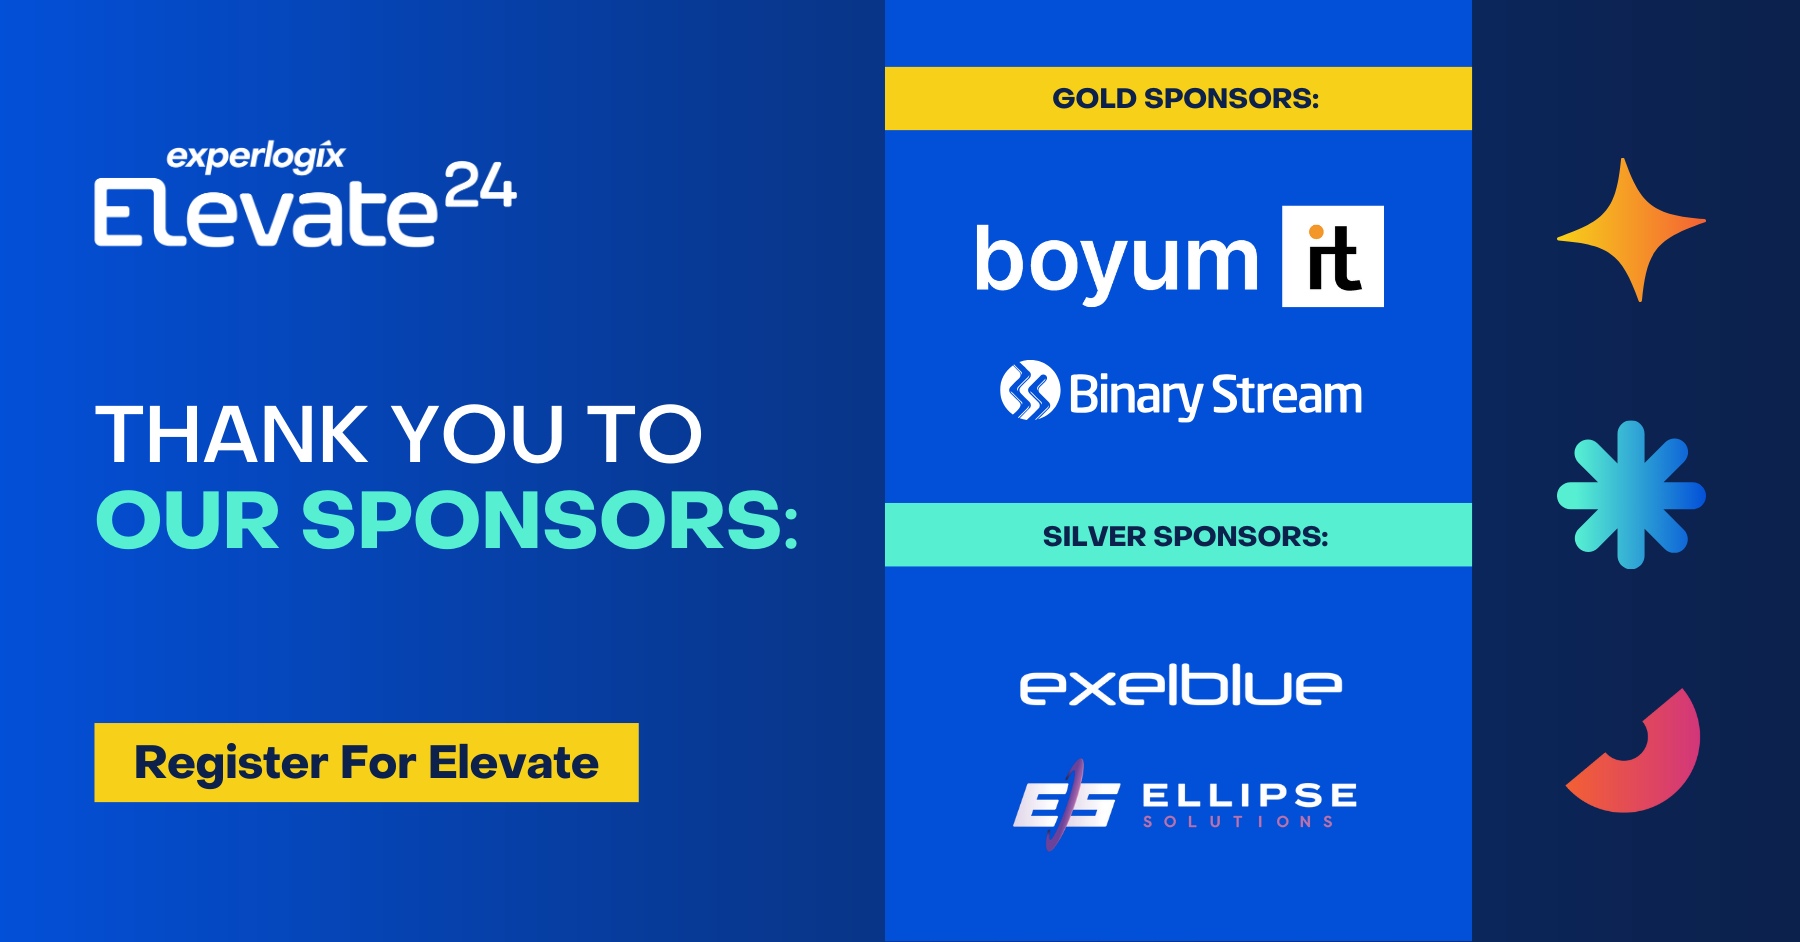 Image of Elevate Client Conference sponsors, including Boyum IT, Binary Stream, exelBlue, and Ellipse Solutions.